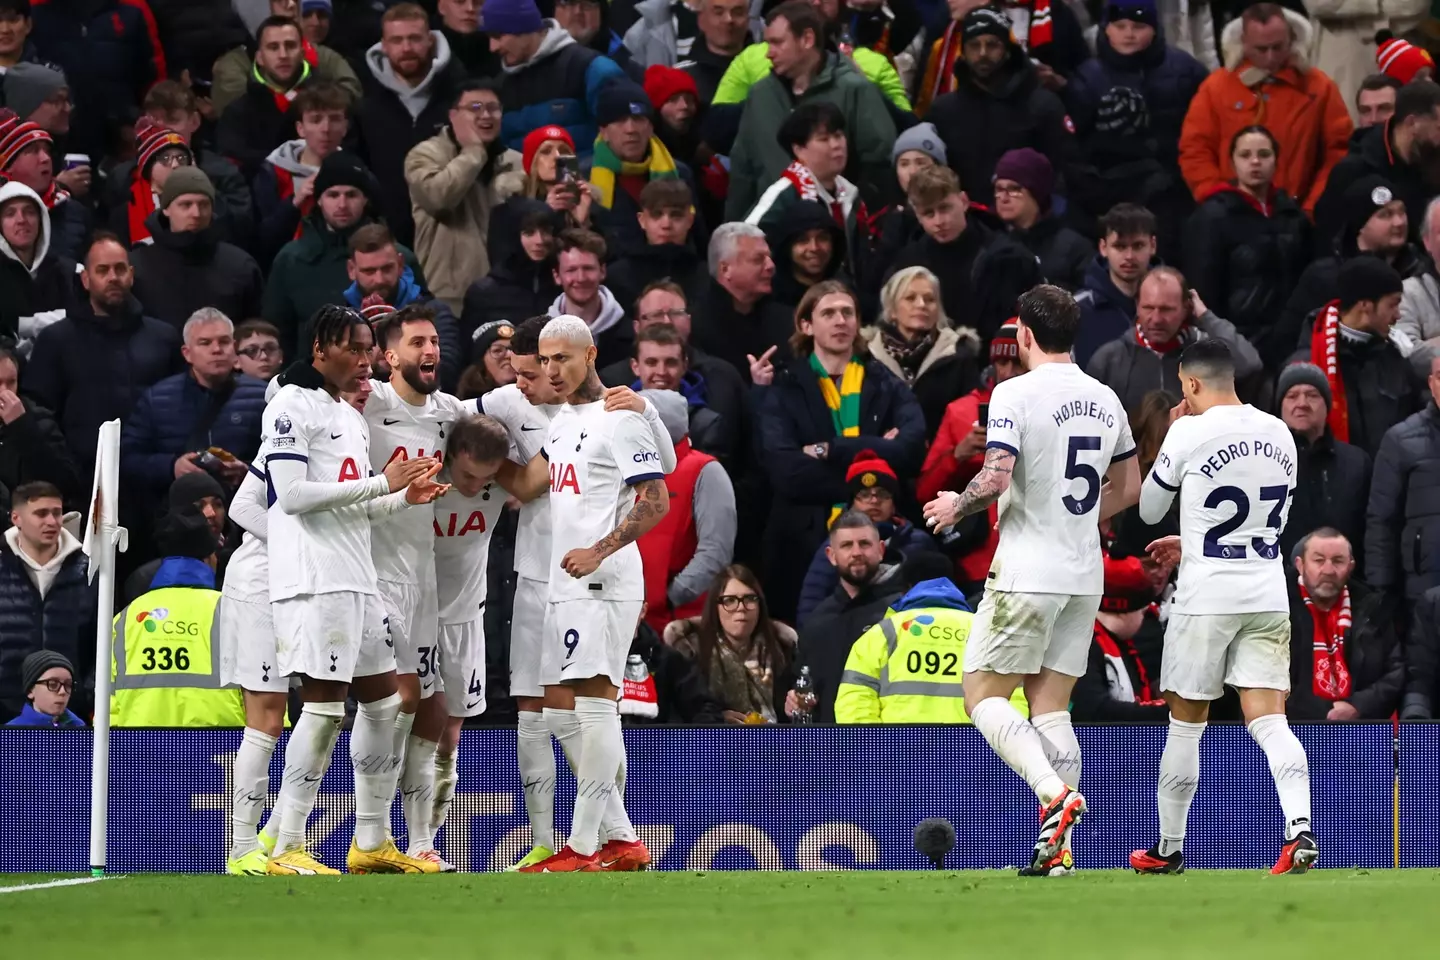 Tottenham players celebrate scoring a goal against Manchester United. Image: Getty 